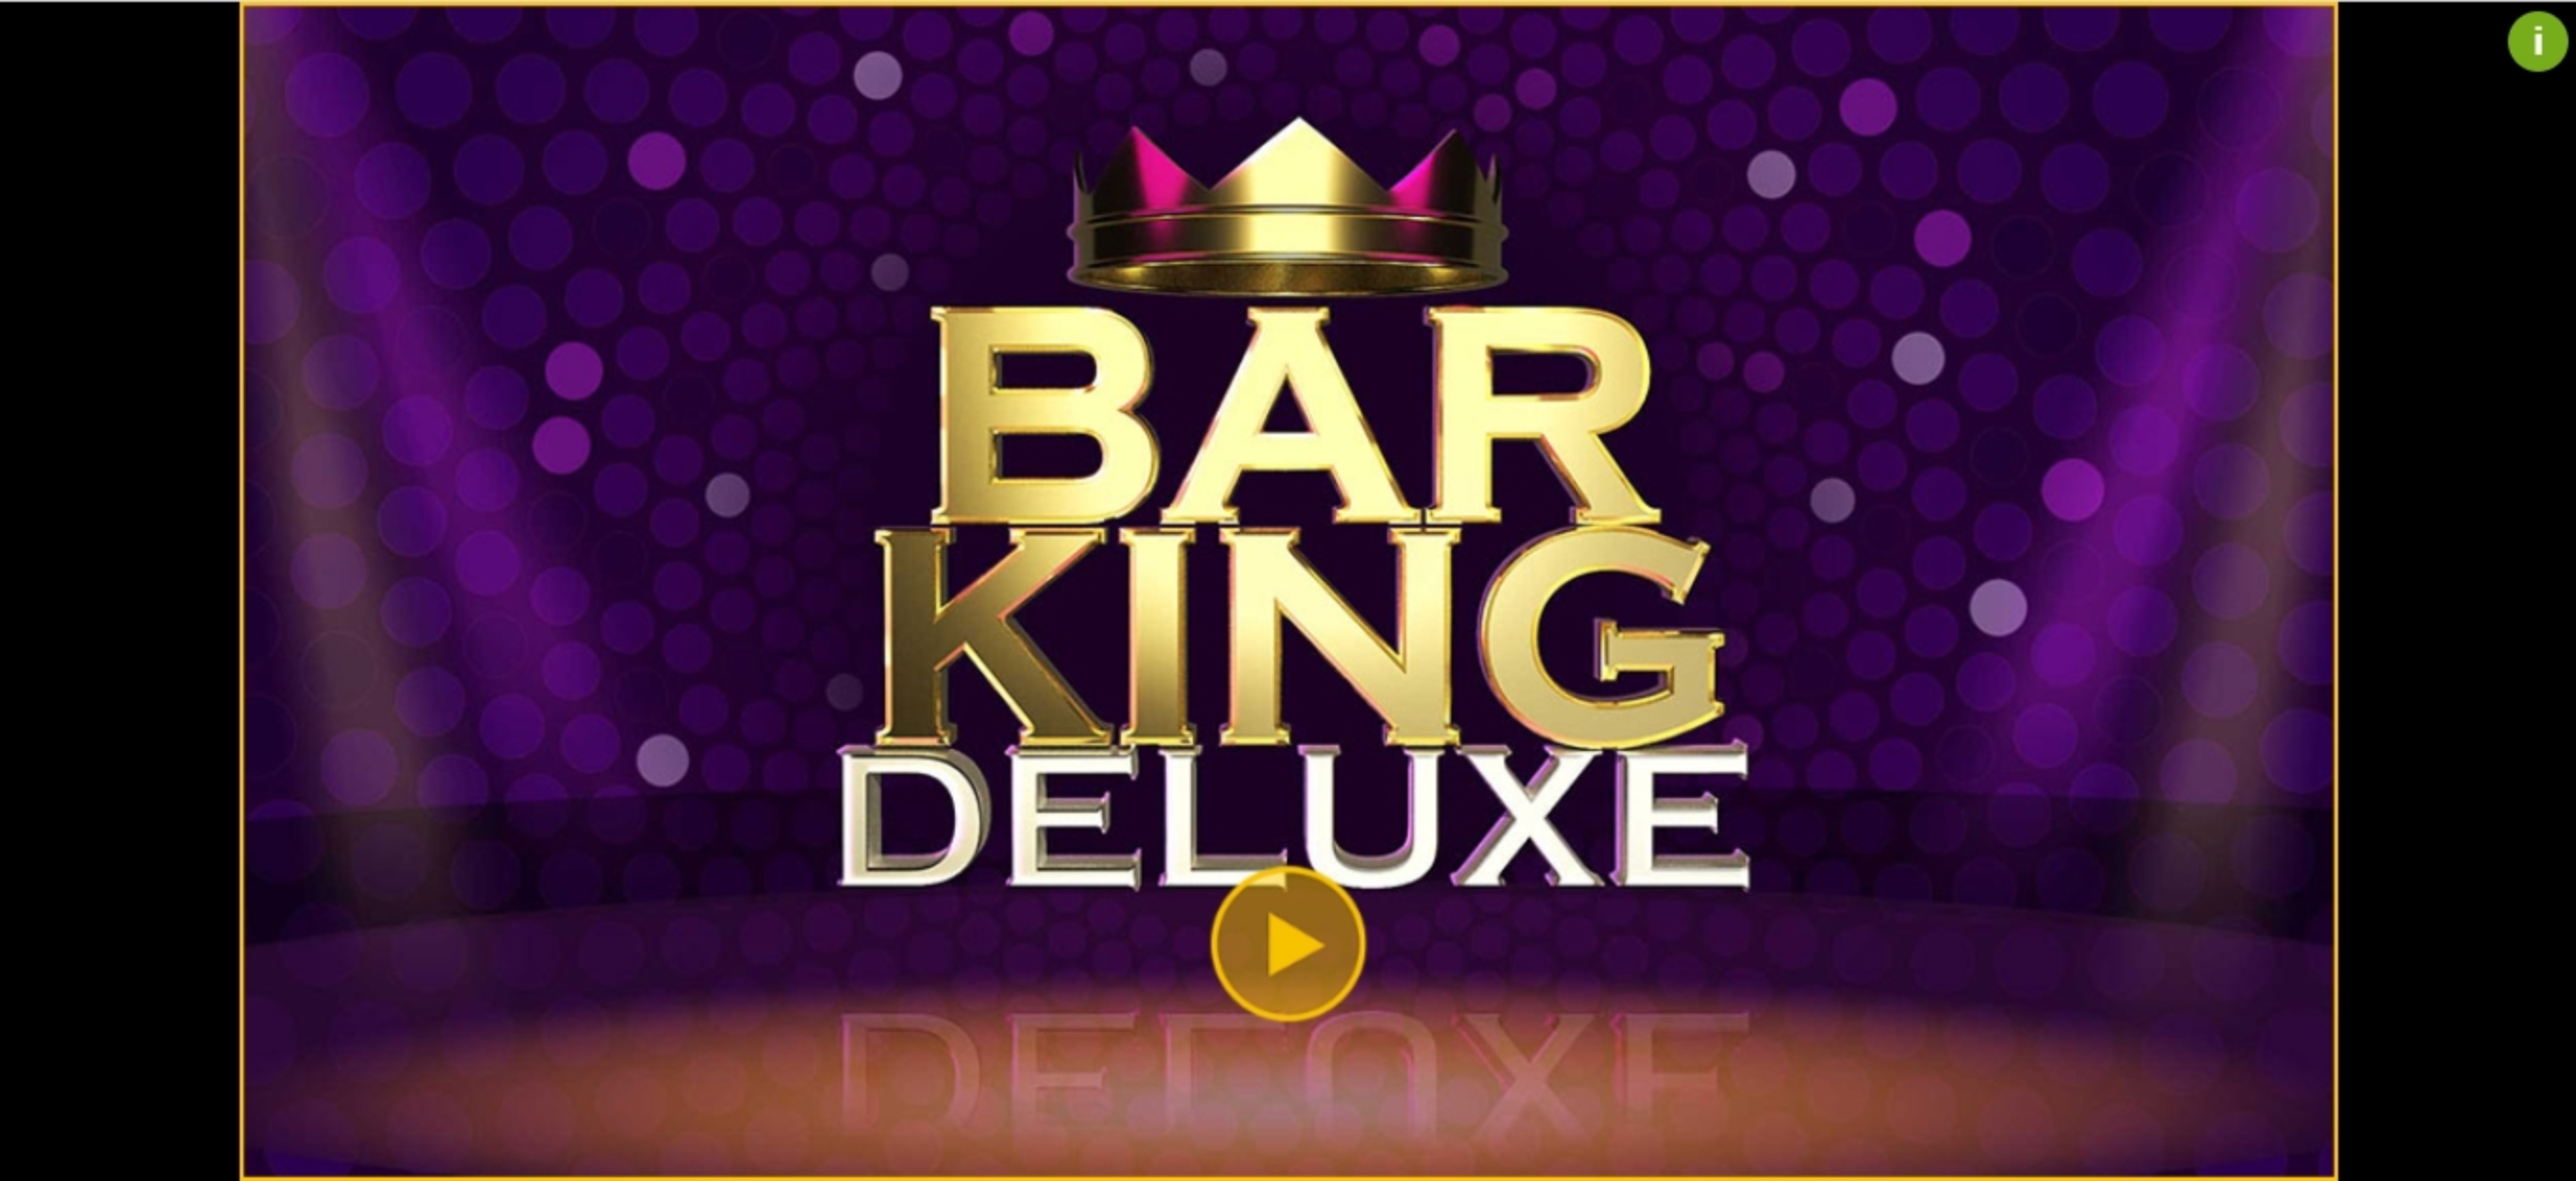 Play Bar King Deluxe Free Casino Slot Game by HungryBear